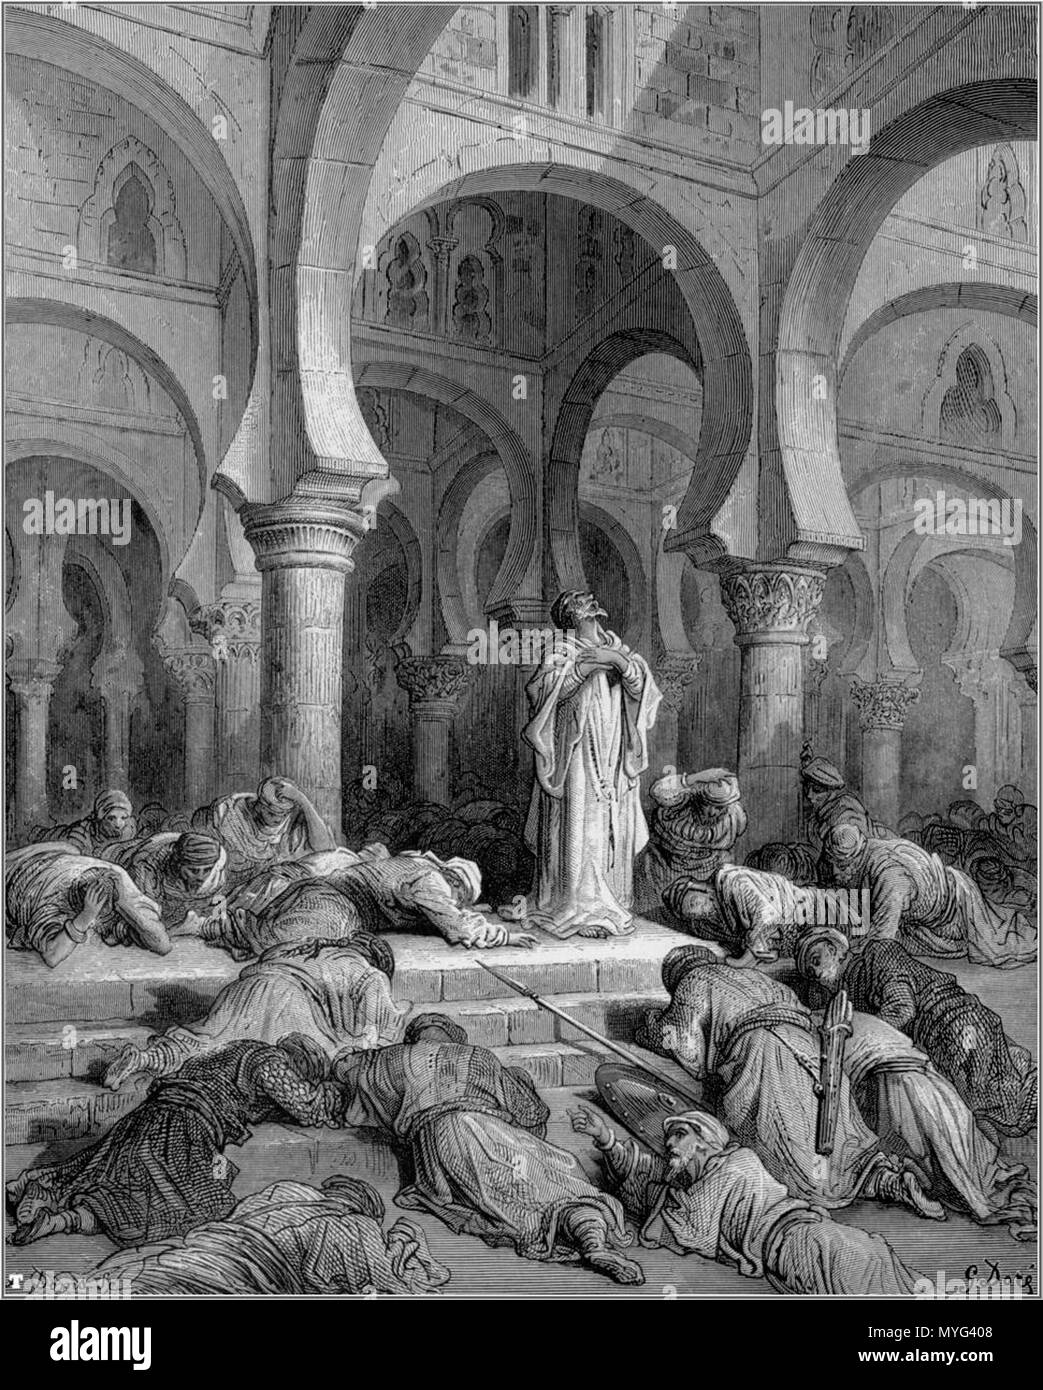 224 Gustave dore crusades invocation to muhammad Stock Photo - Alamy